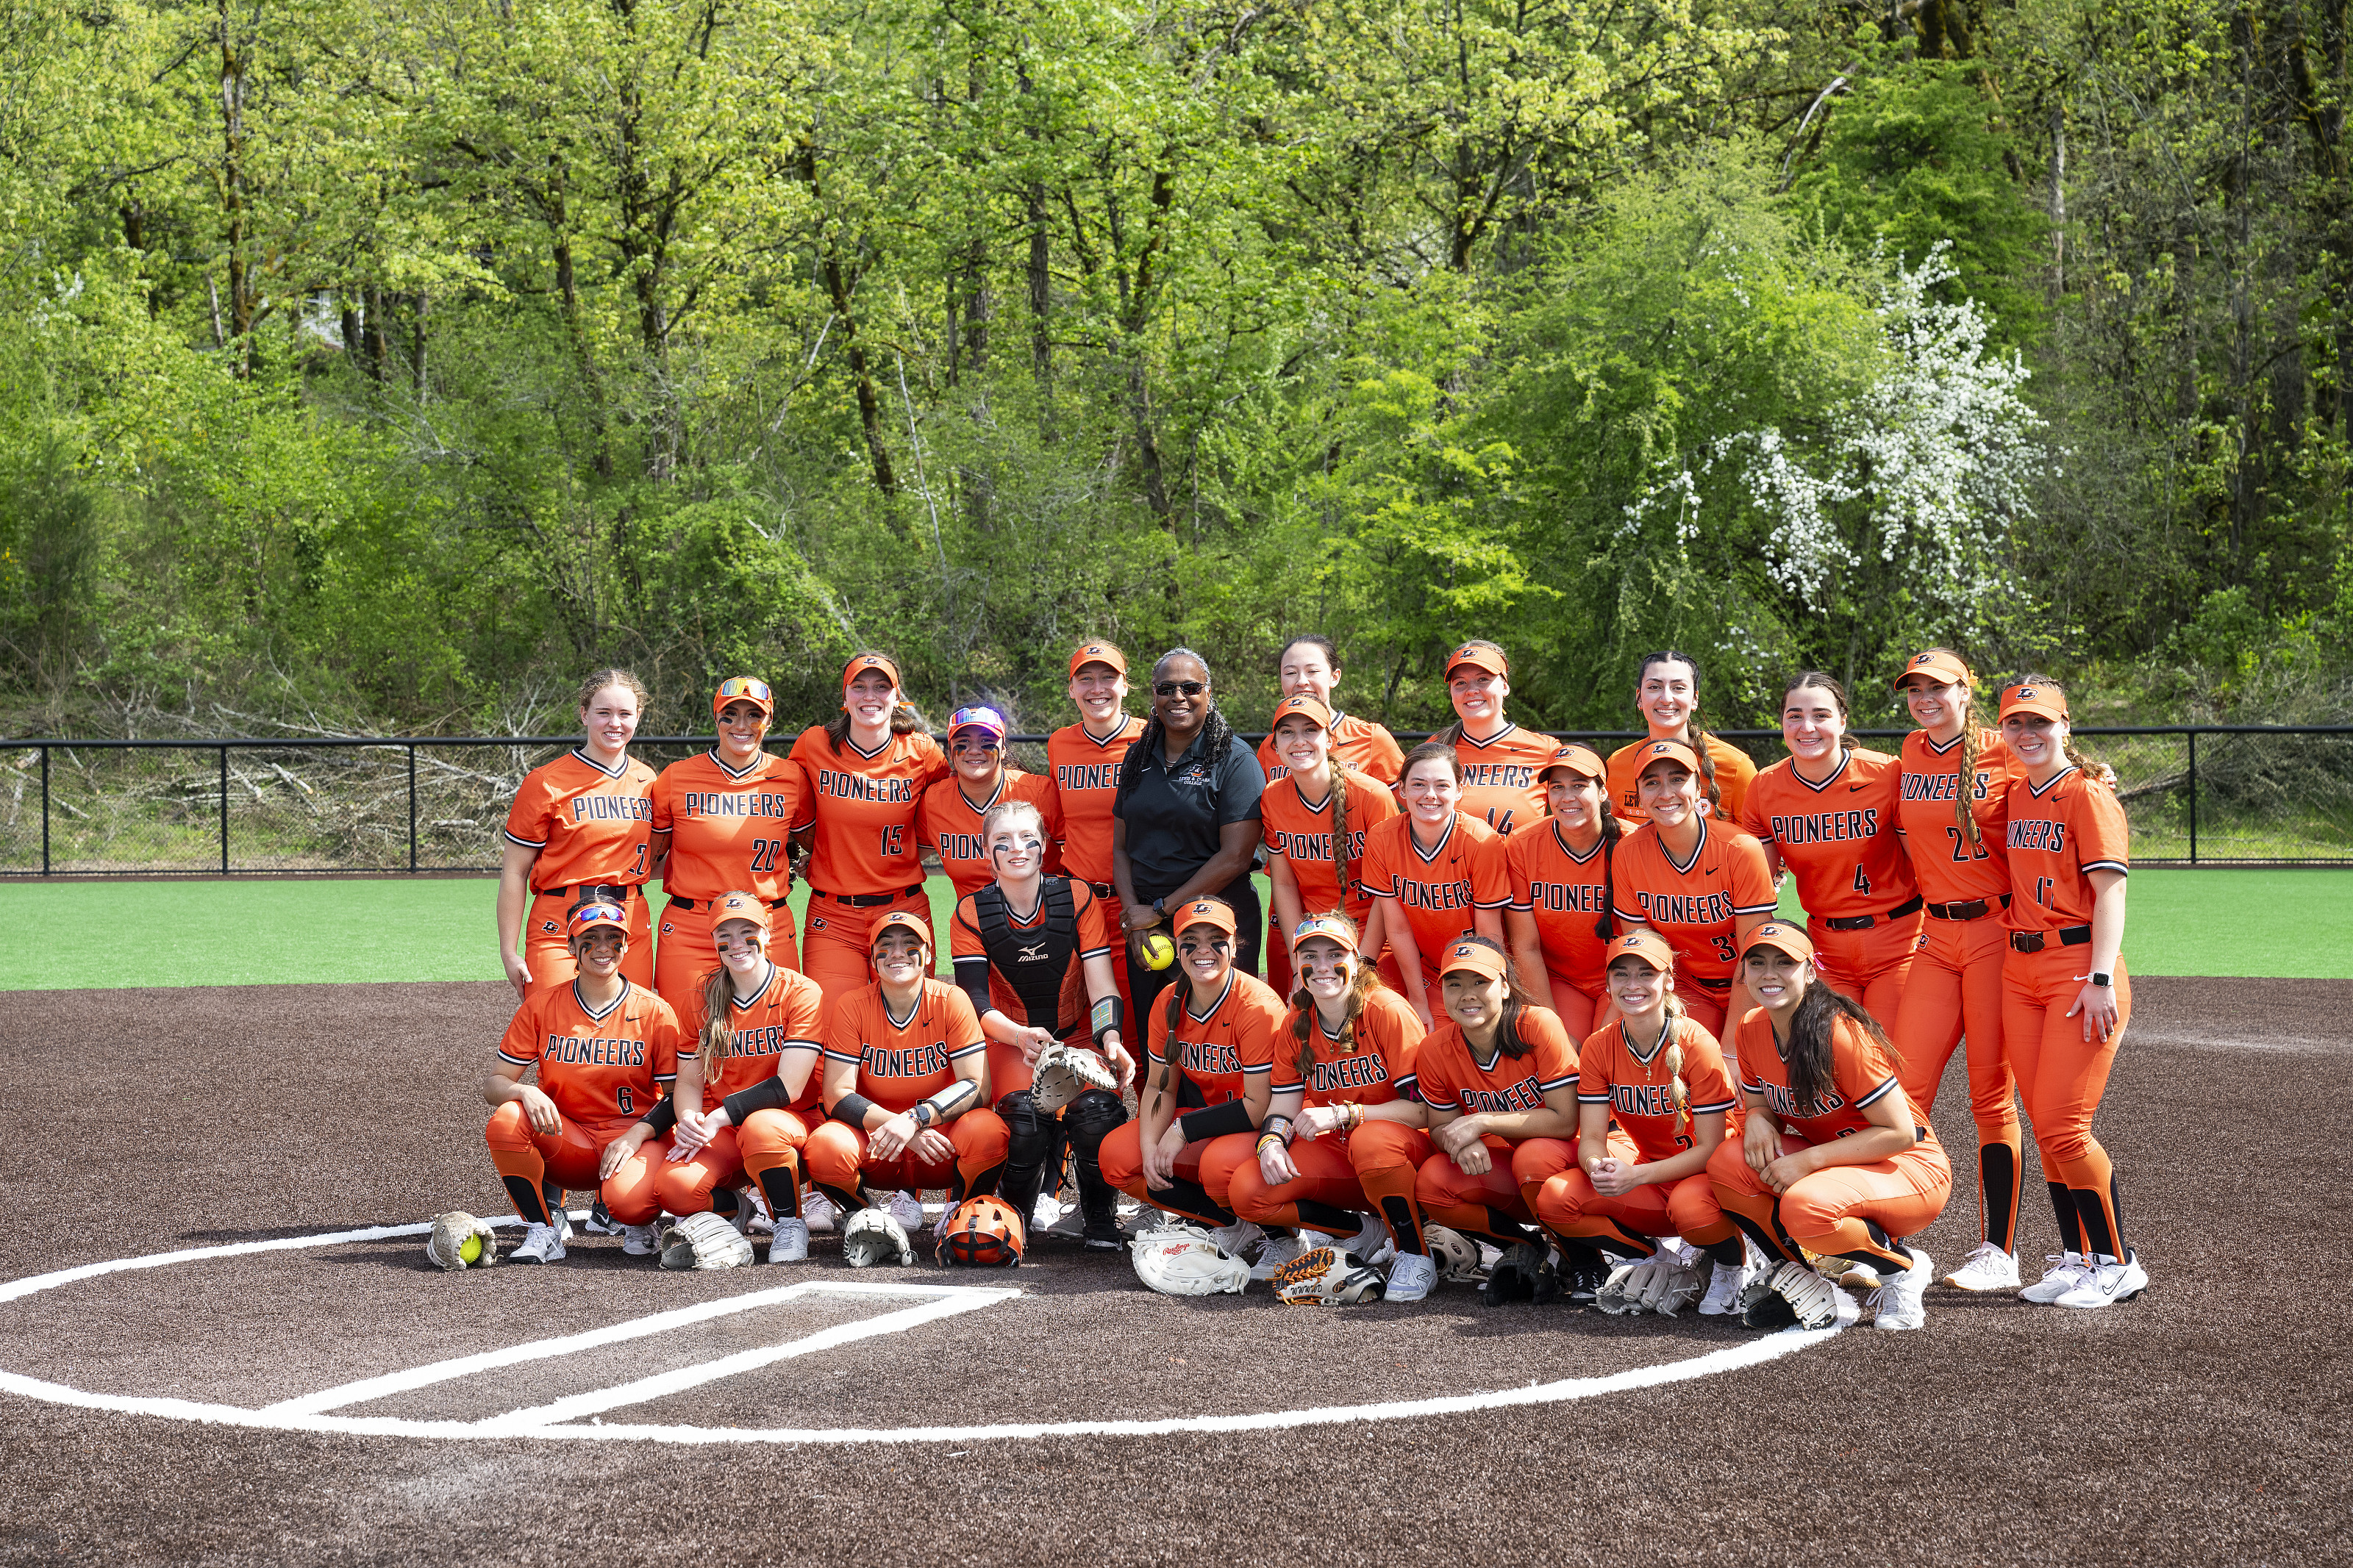 A group shot of student softball players wearing orange uniforms with President Holmes-Sullivan standing in the middle of the group.